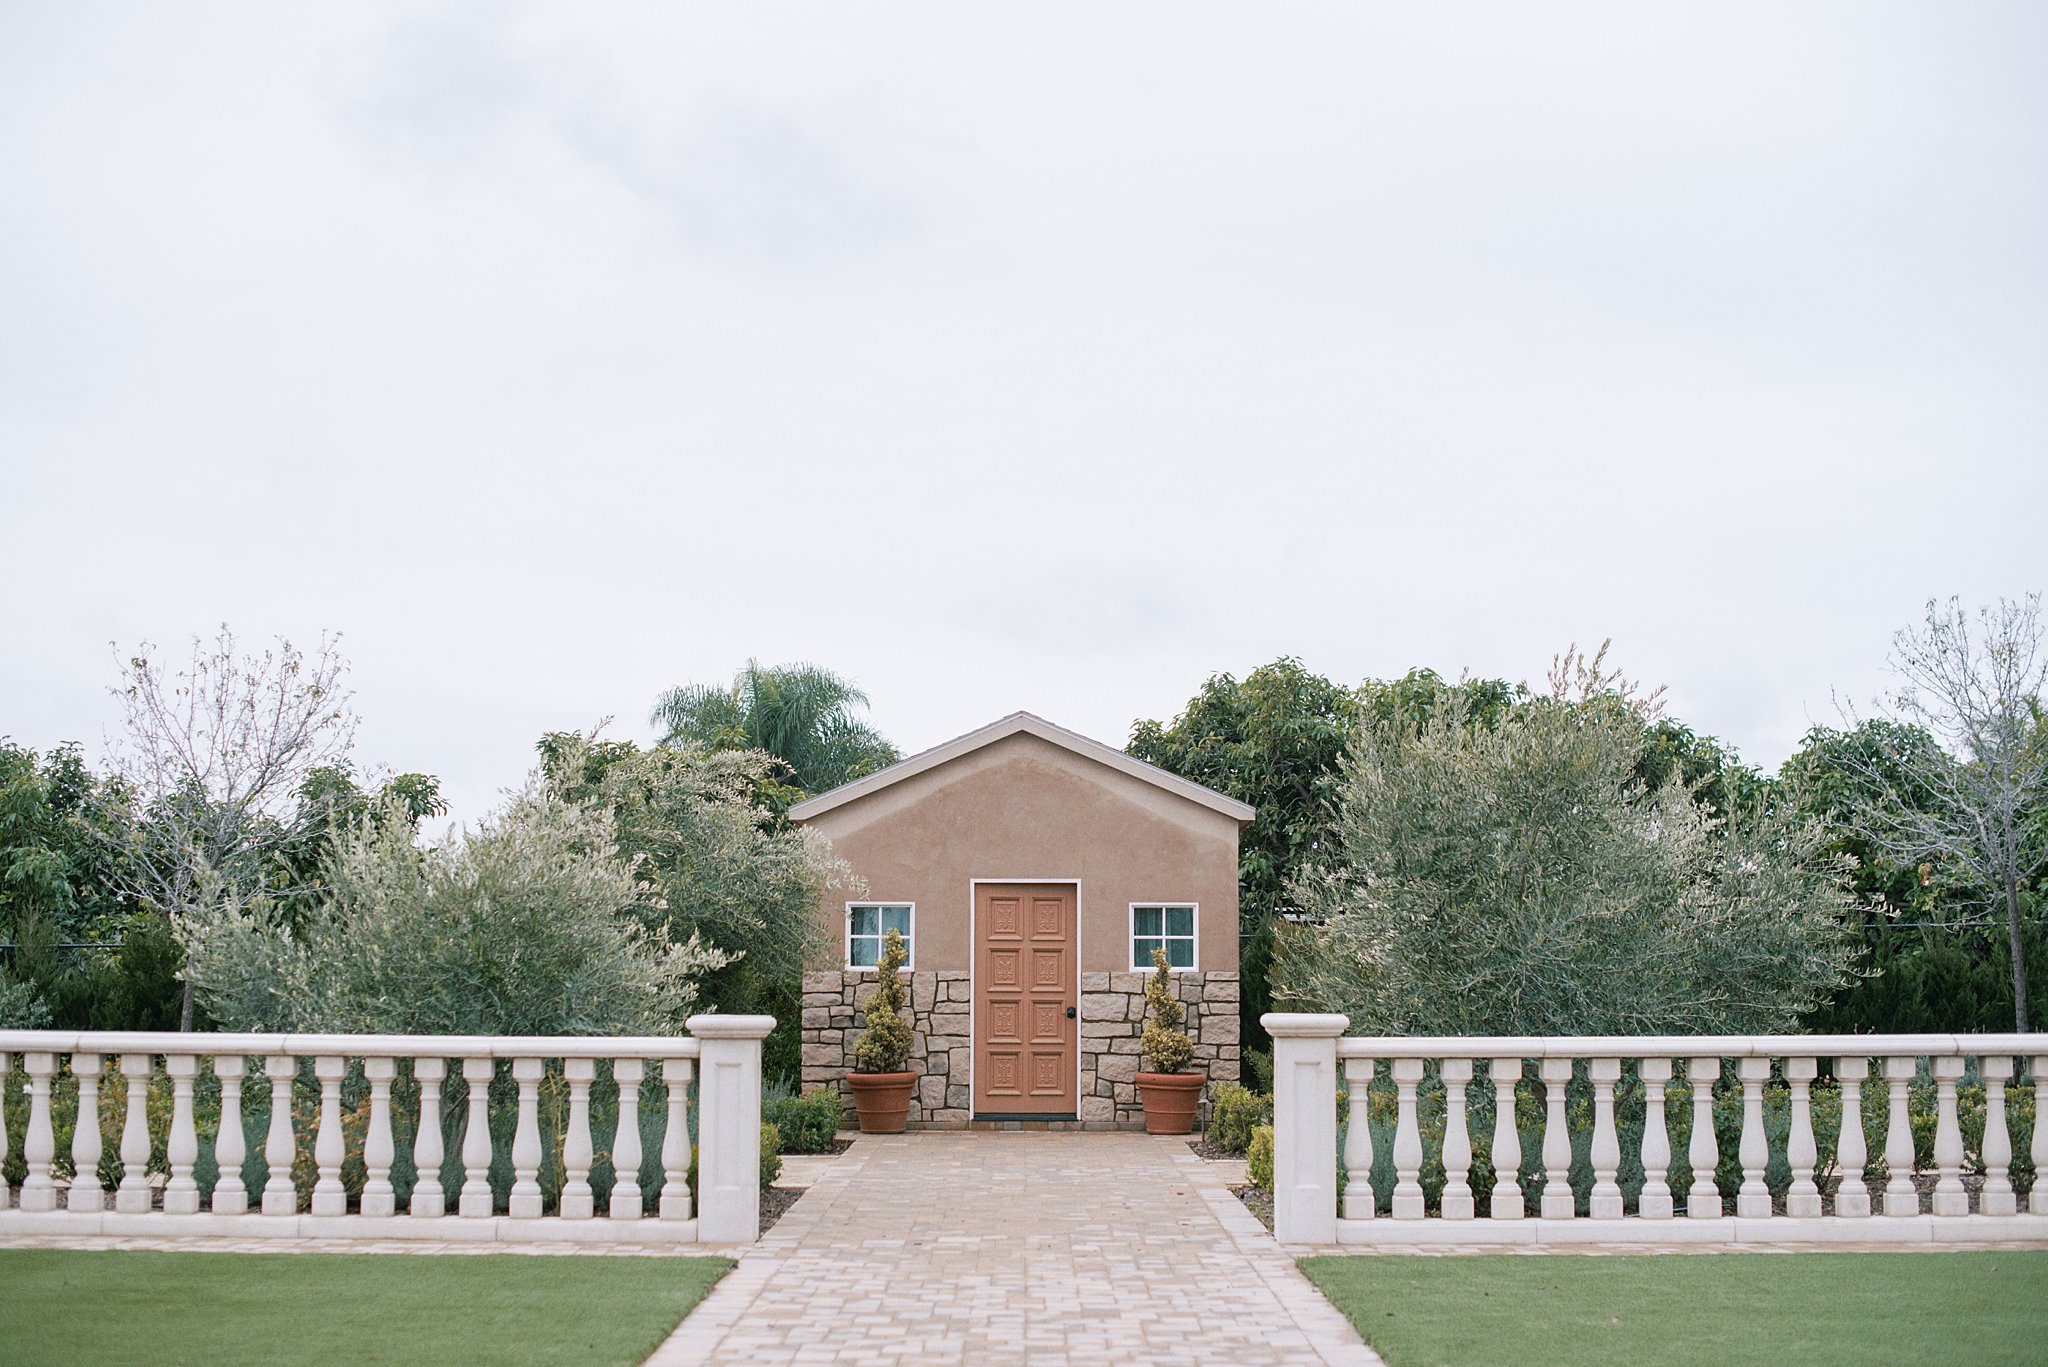 Alternate ceremony view at Tuscan Rose Ranch features stone columns and a view of a getting ready suite